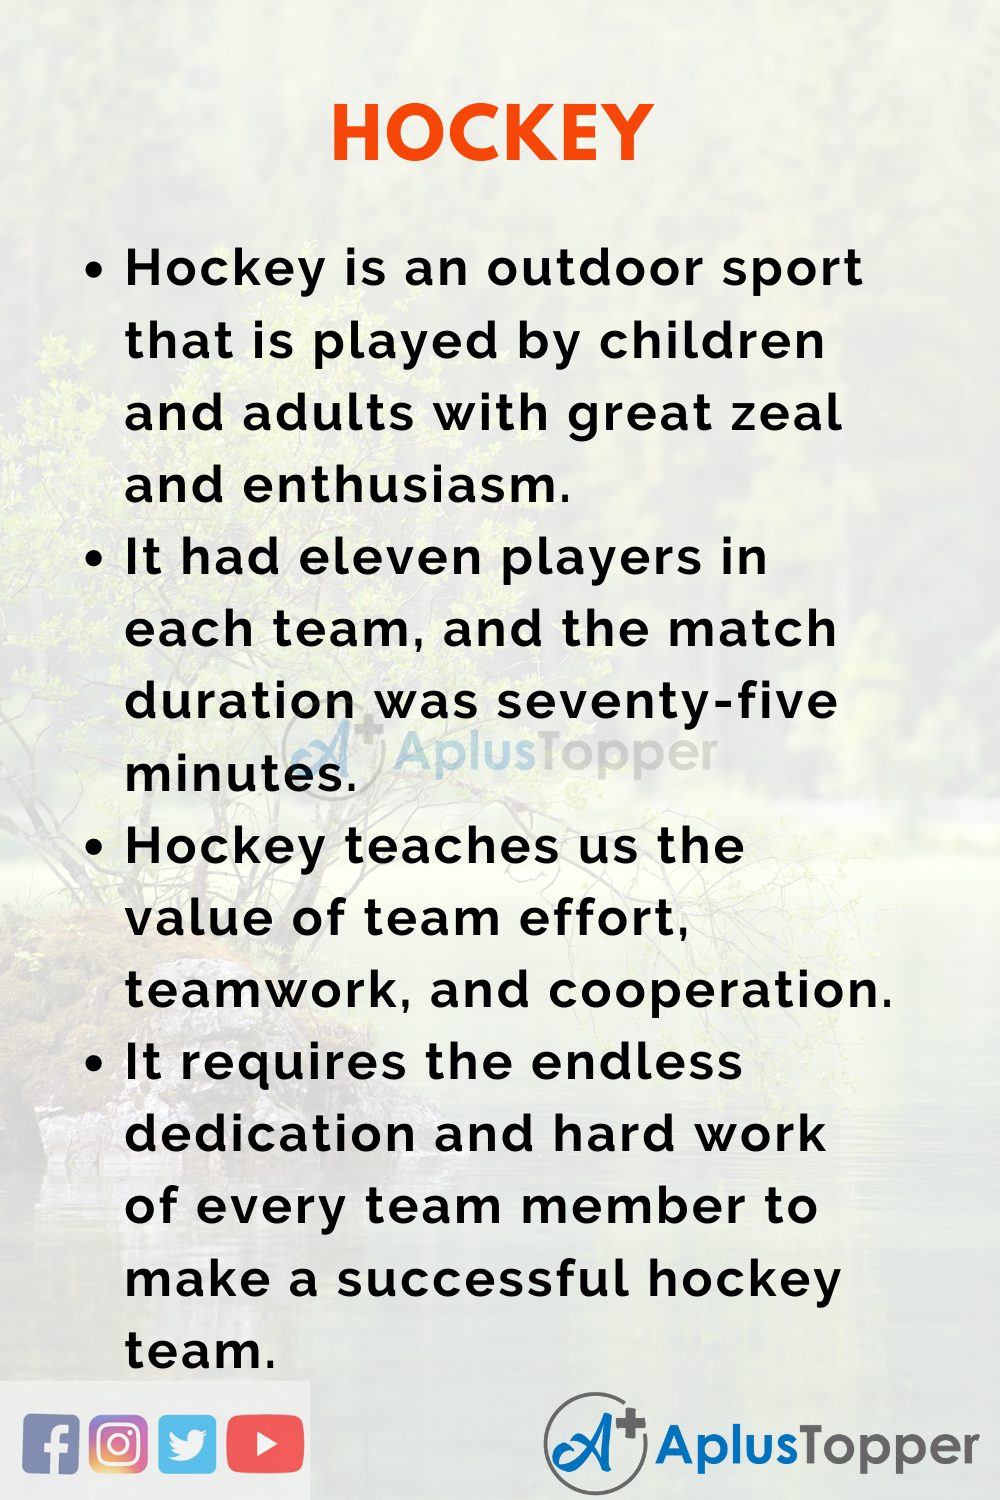 research paper topics hockey